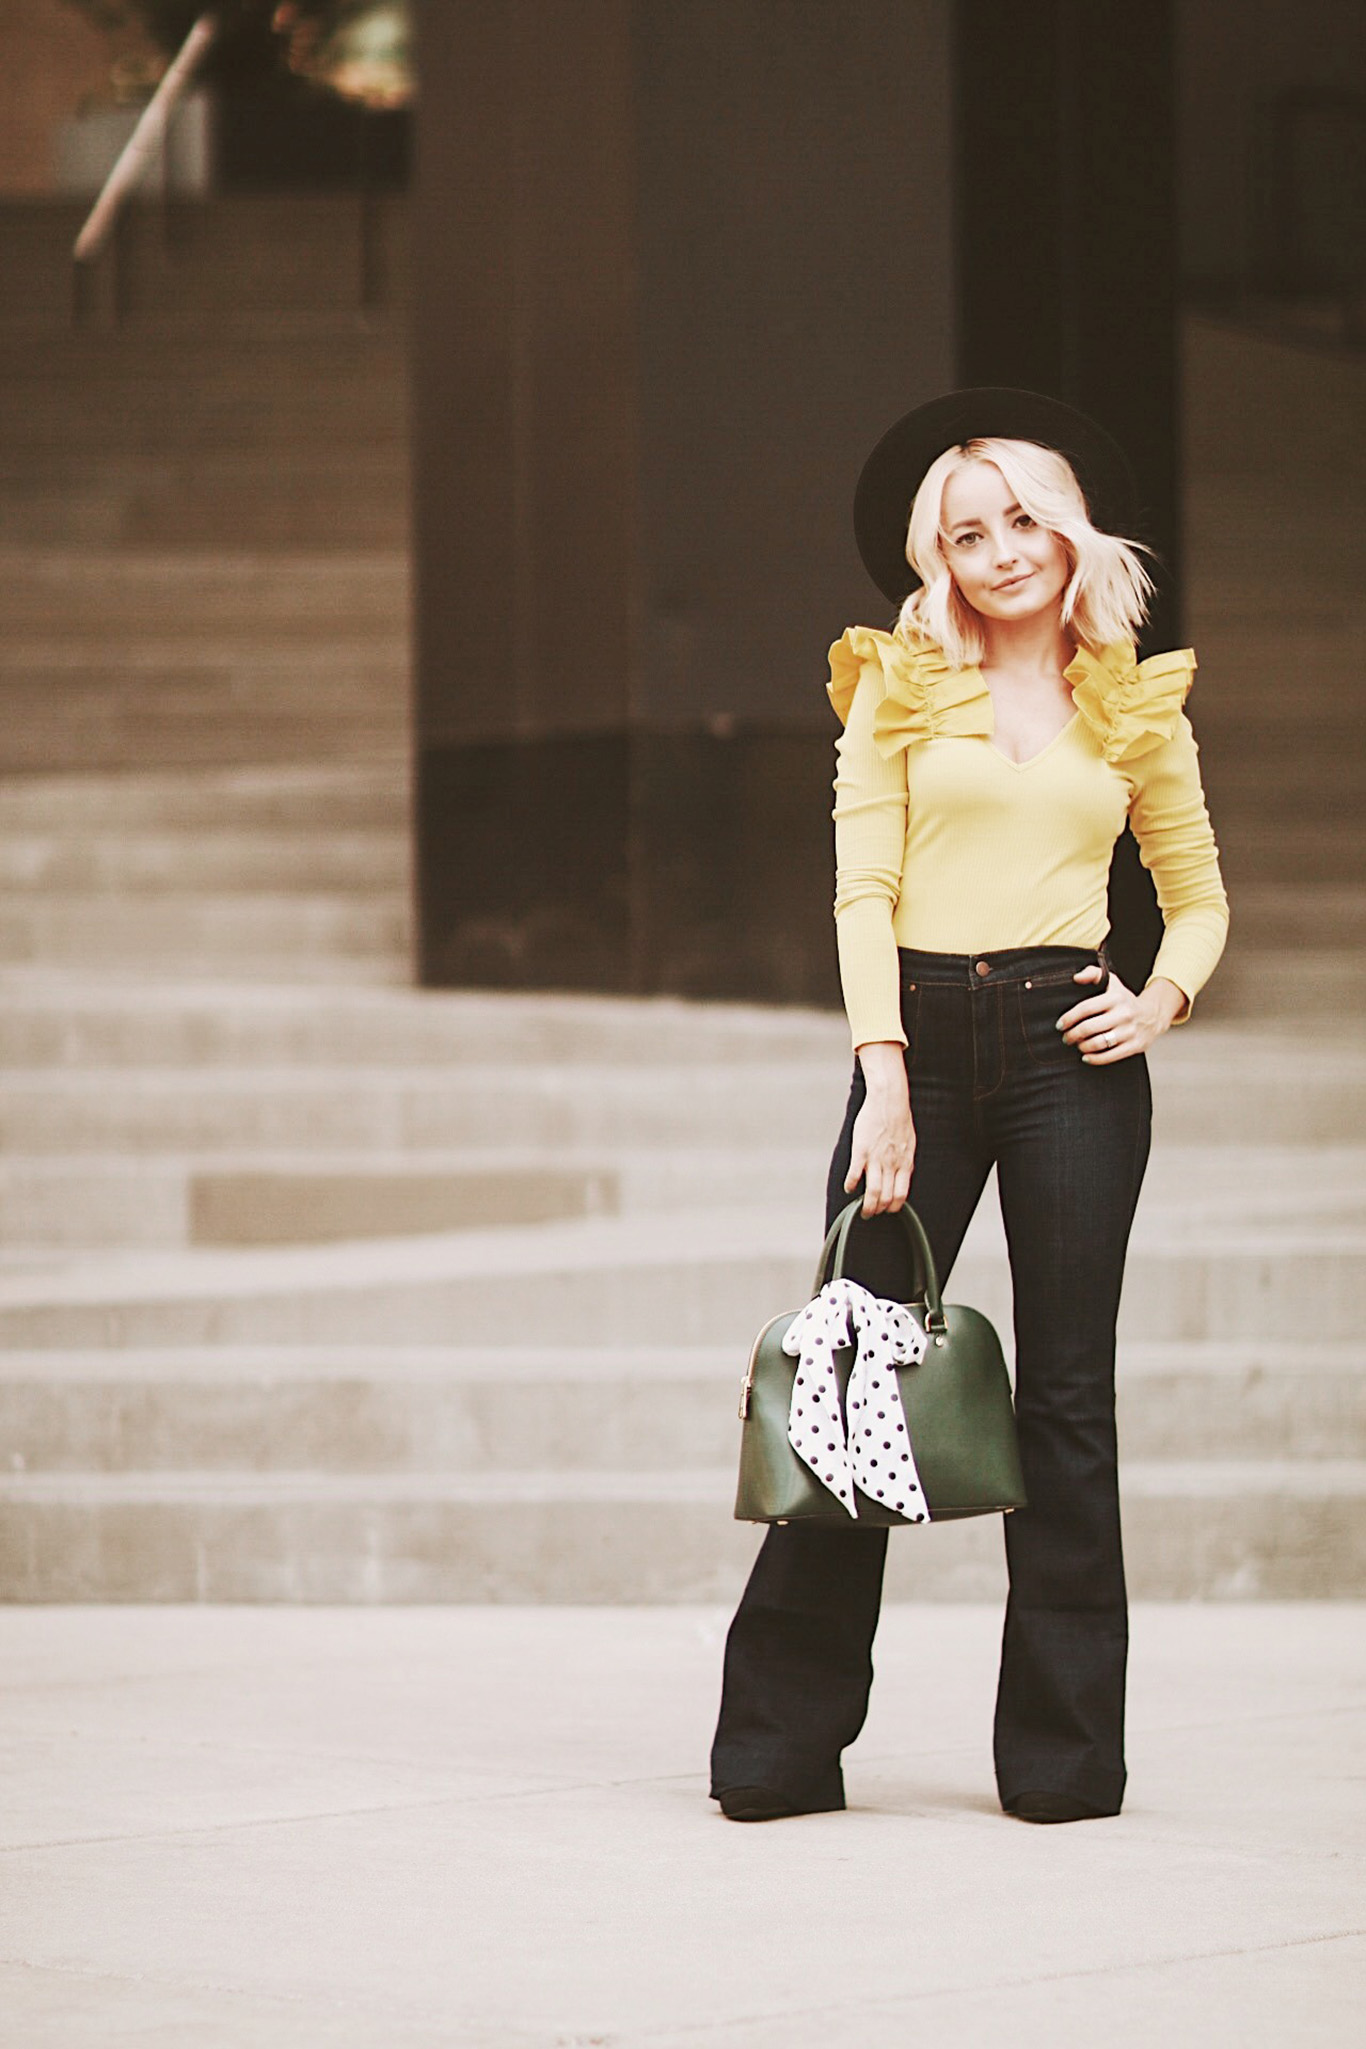 Alena Gidenko of modaprints.com shoes tips on styling flare jeans this Fall